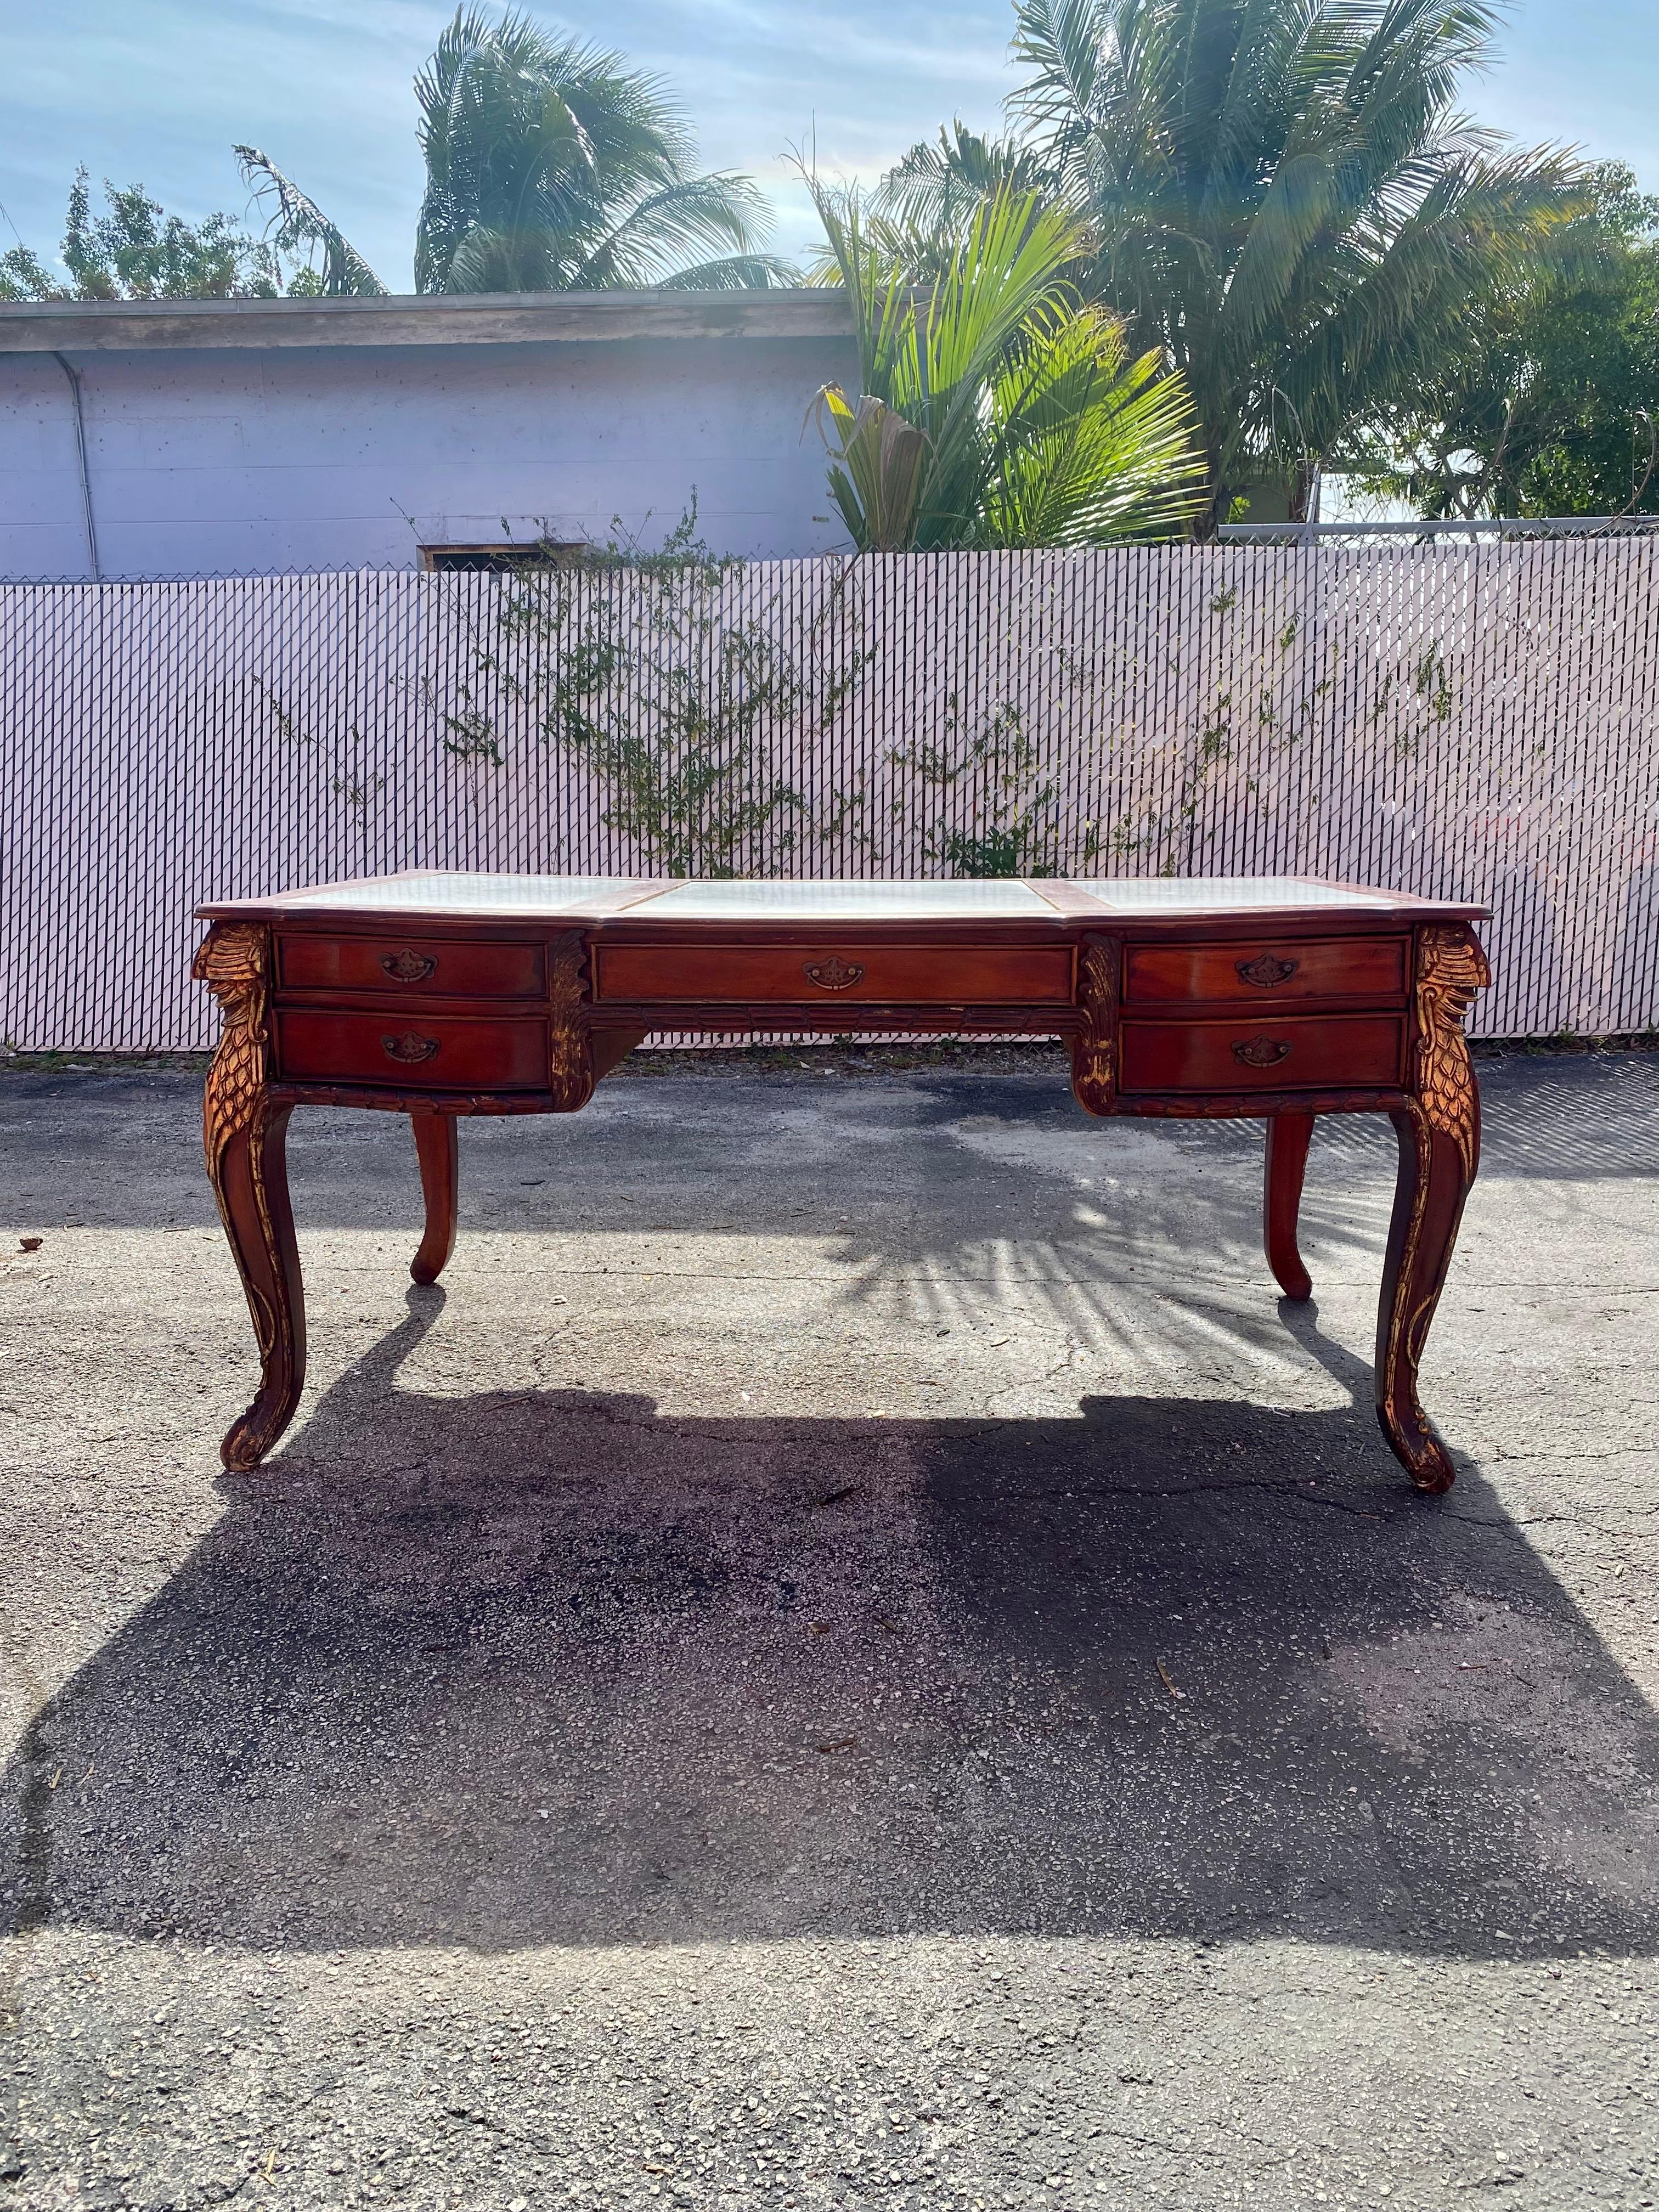 On offer on this occasion is one of the most stunning, one of kind, Louis marble wood desk you could hope to find. No bronze details like the standard desks. This is a rare opportunity to acquire the most spectacular, solid hand carved wood and